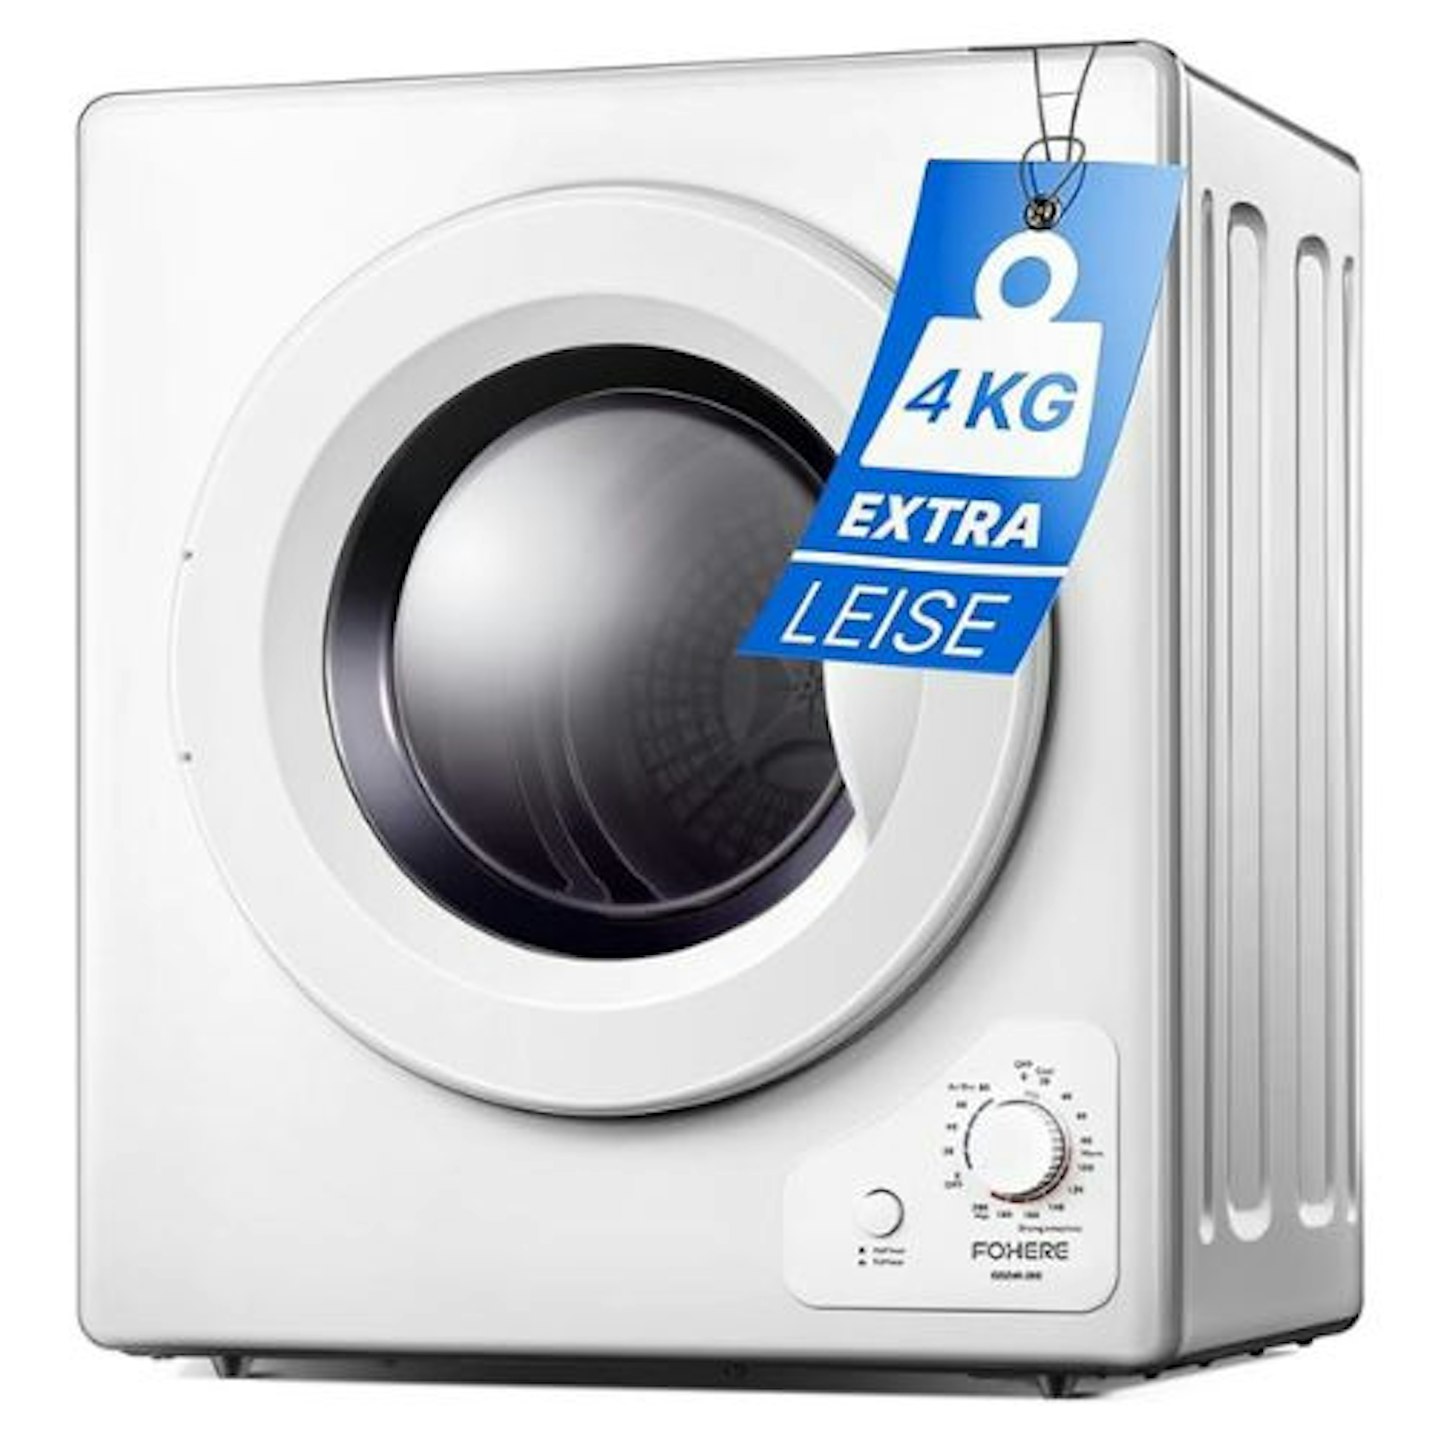 FOHERE 4KG Vented Tumble Dryer with Sensor Dry